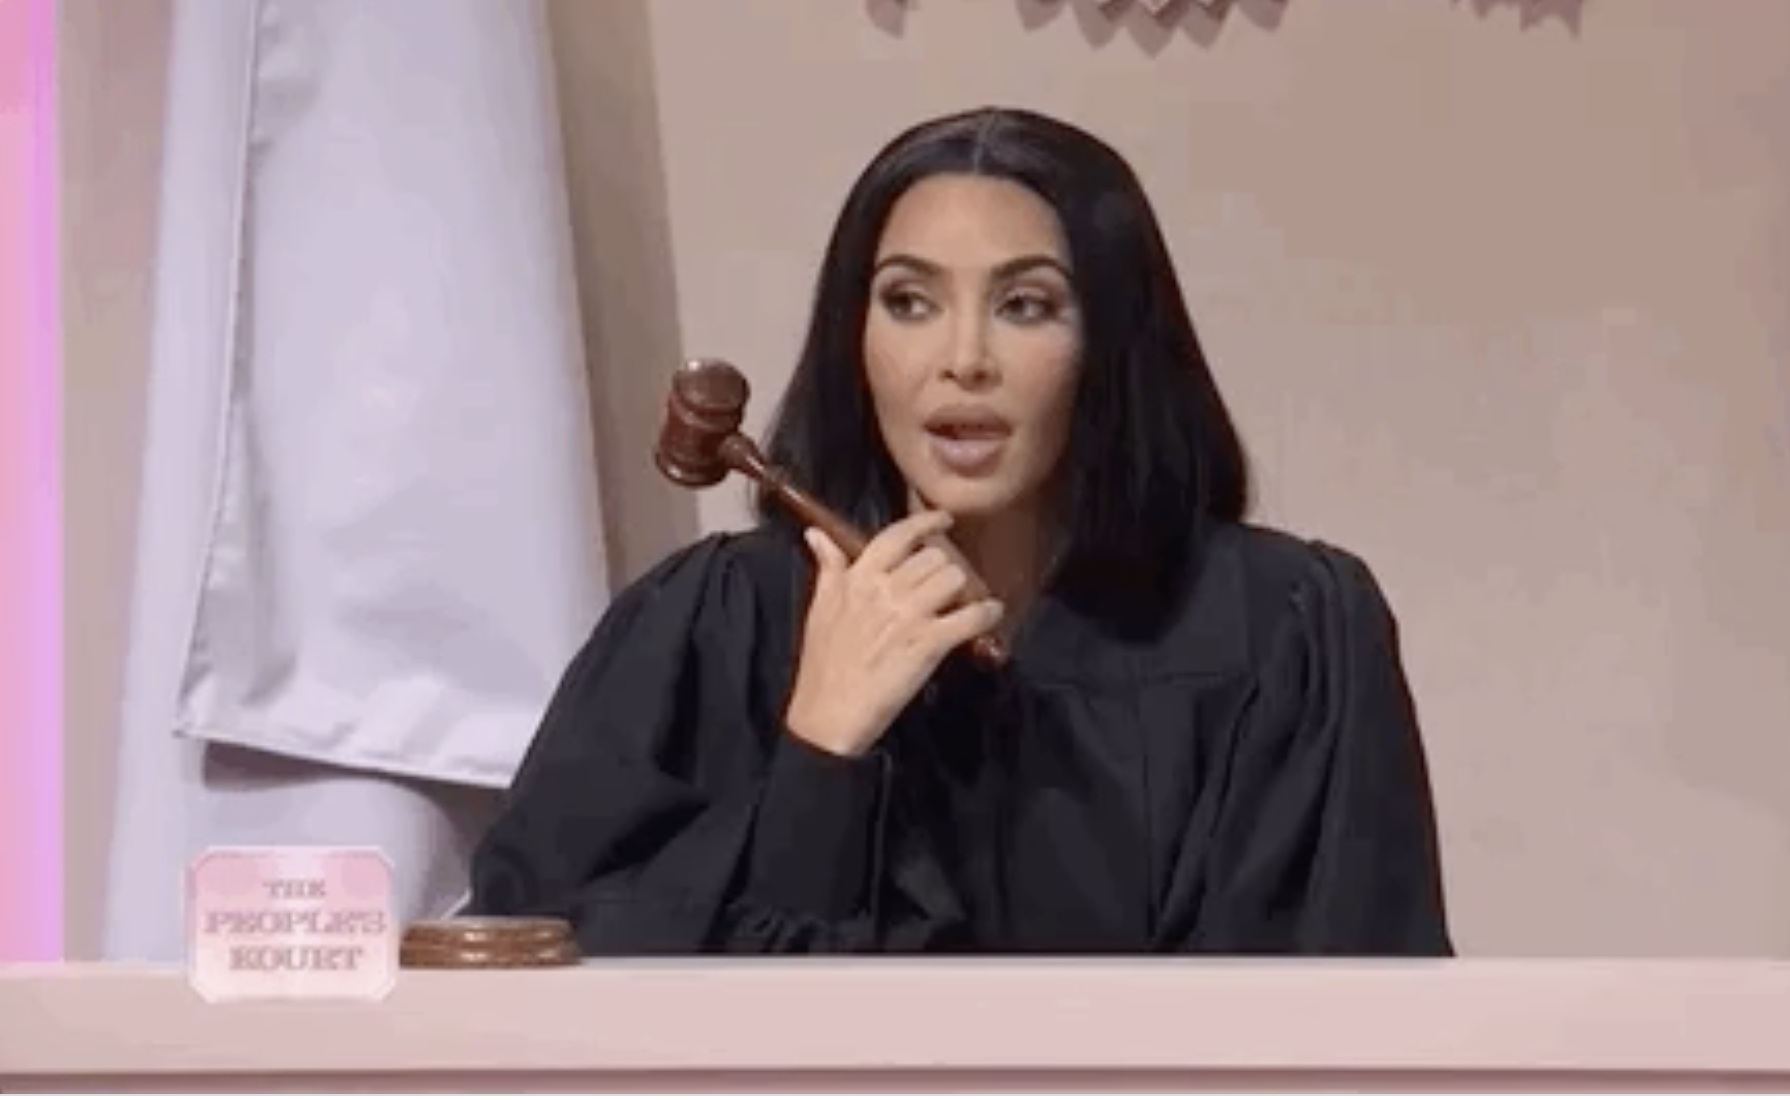 Kim Kardashian wearing a judge&#x27;s robe, seated behind a bench with a gavel in hand, looking thoughtful